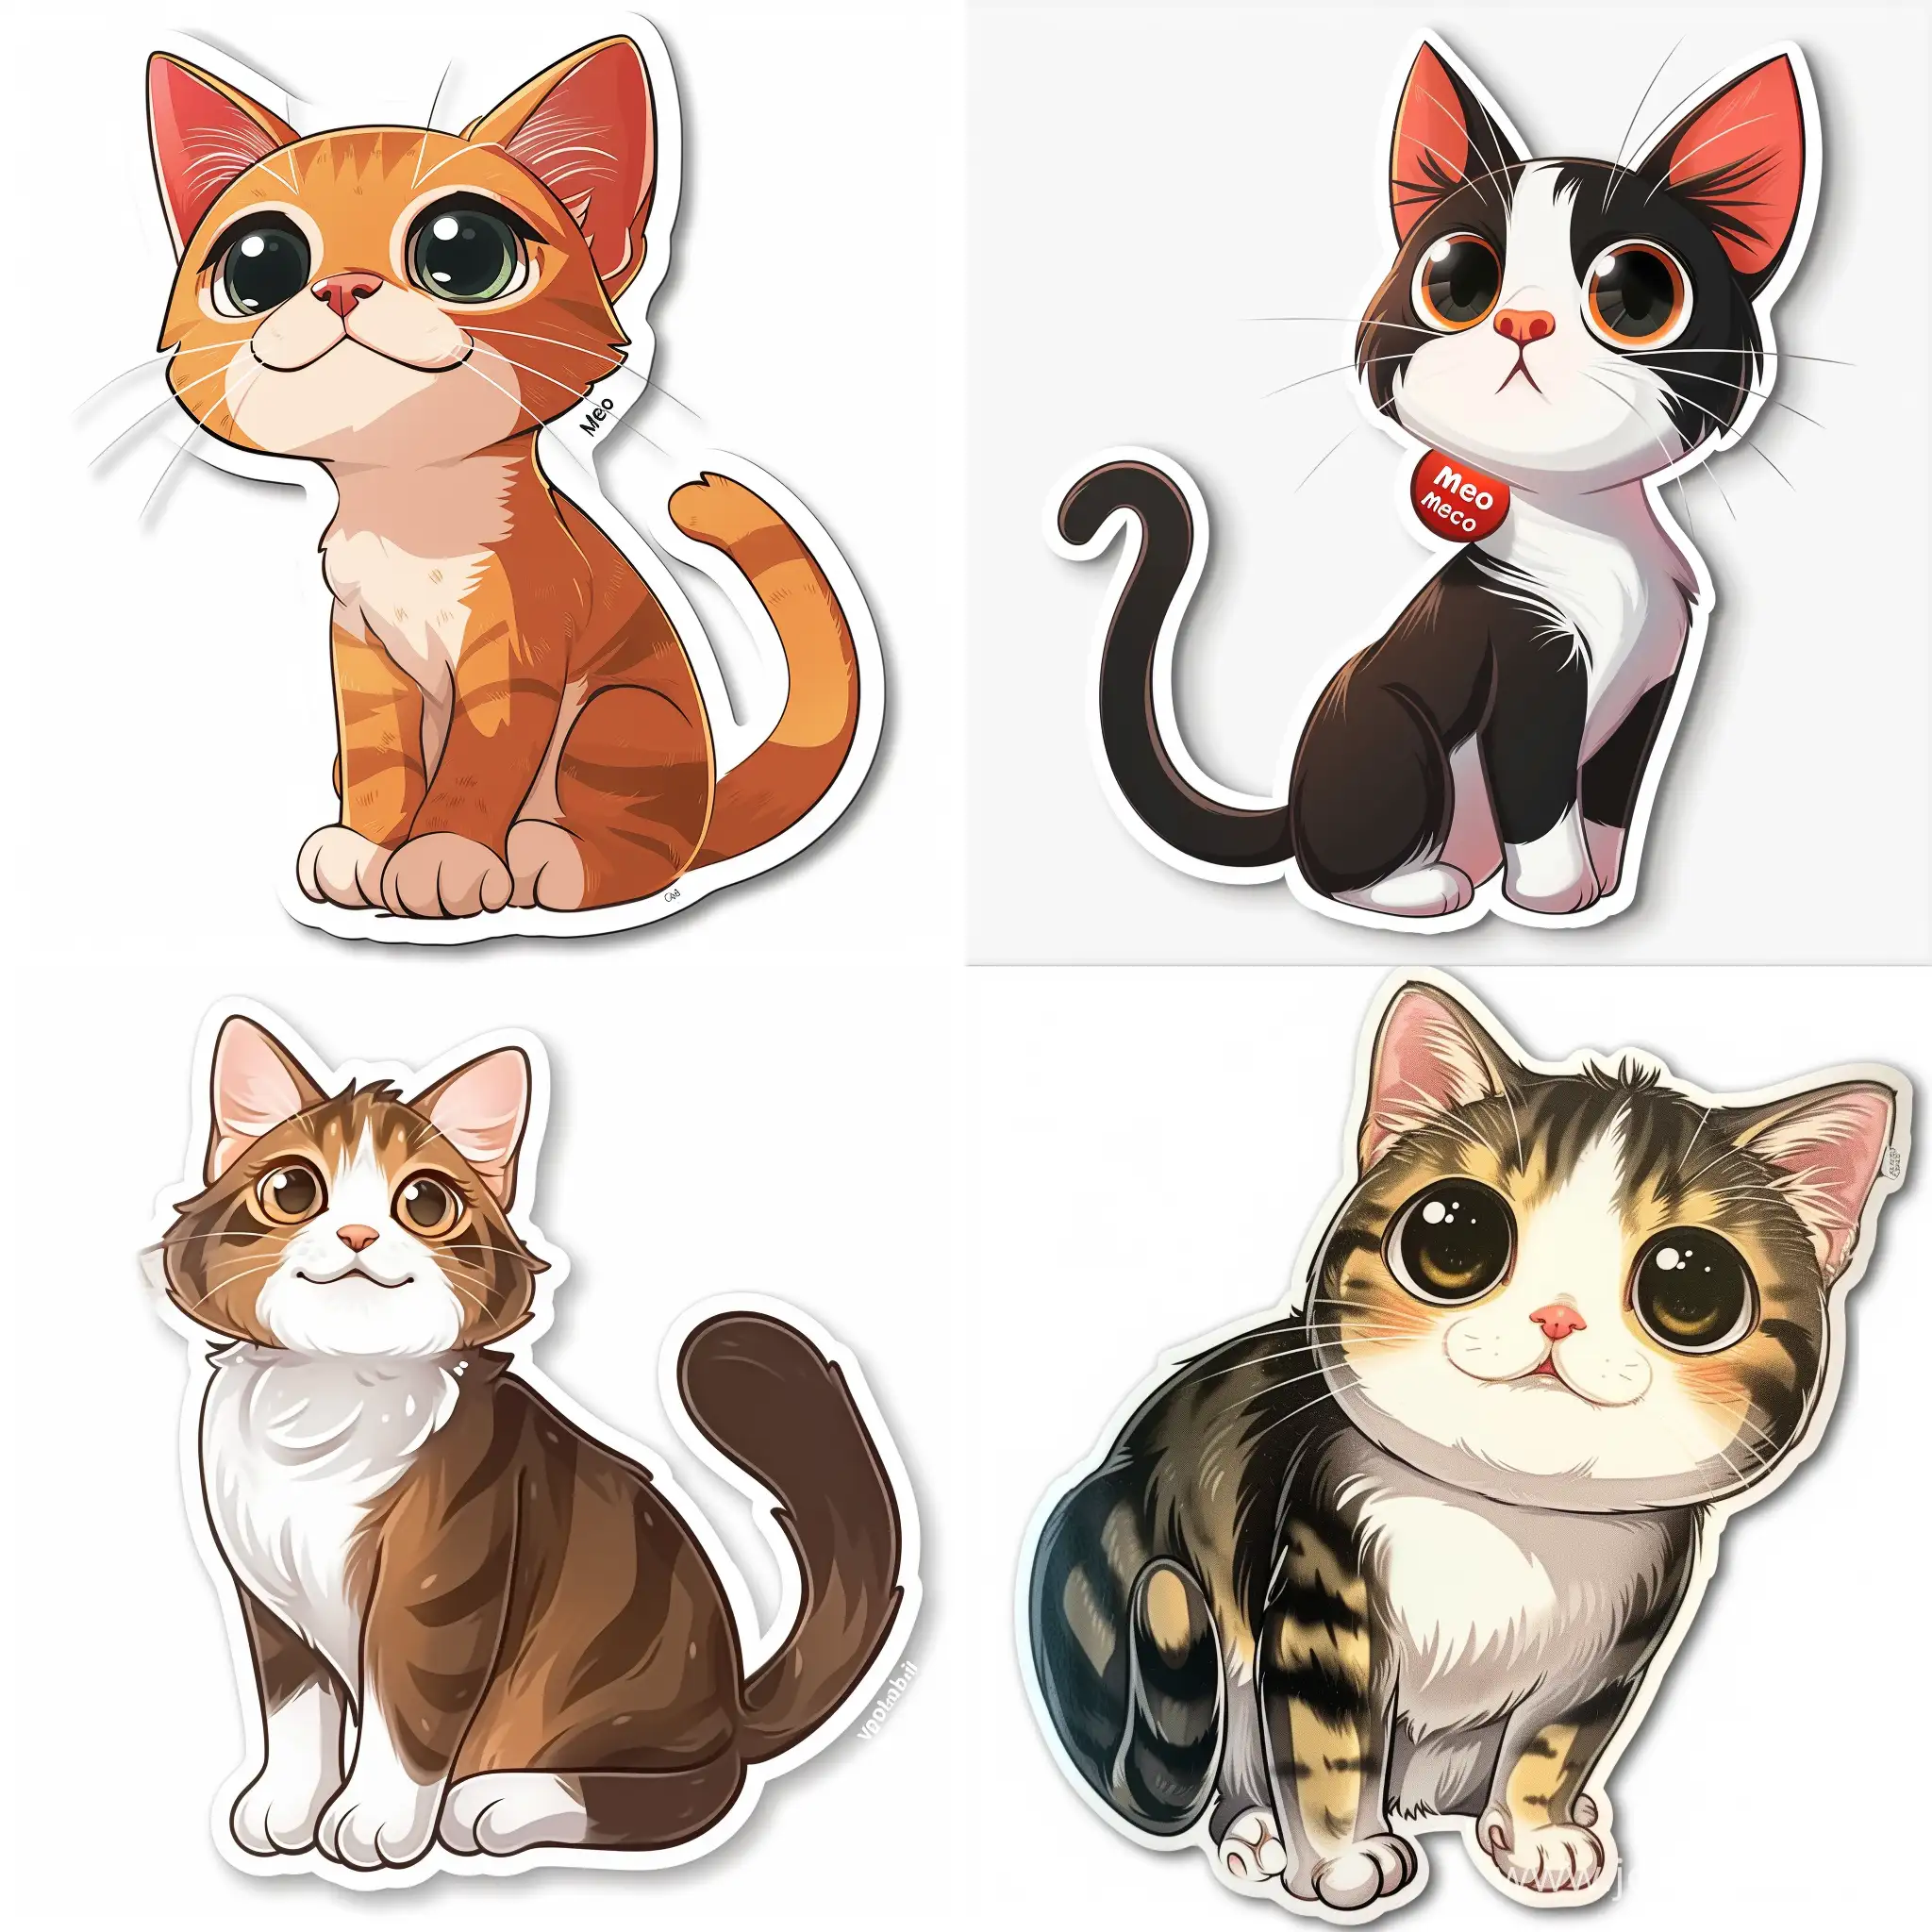 cat Meo from vkontakte stickers